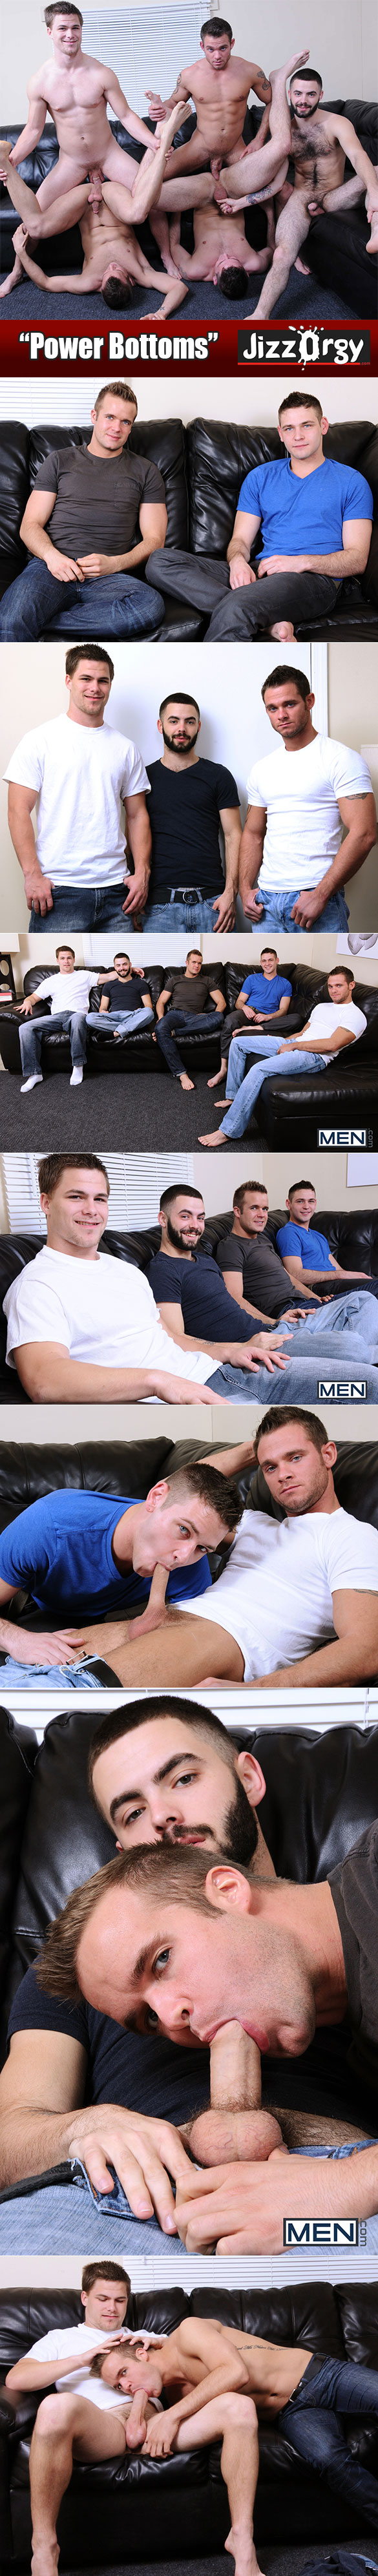 Men.com: Duncan Black and Connor Patricks get fucked by Jimmy Johnson, Josh Long and Cooper Reed in "Power Bottoms"